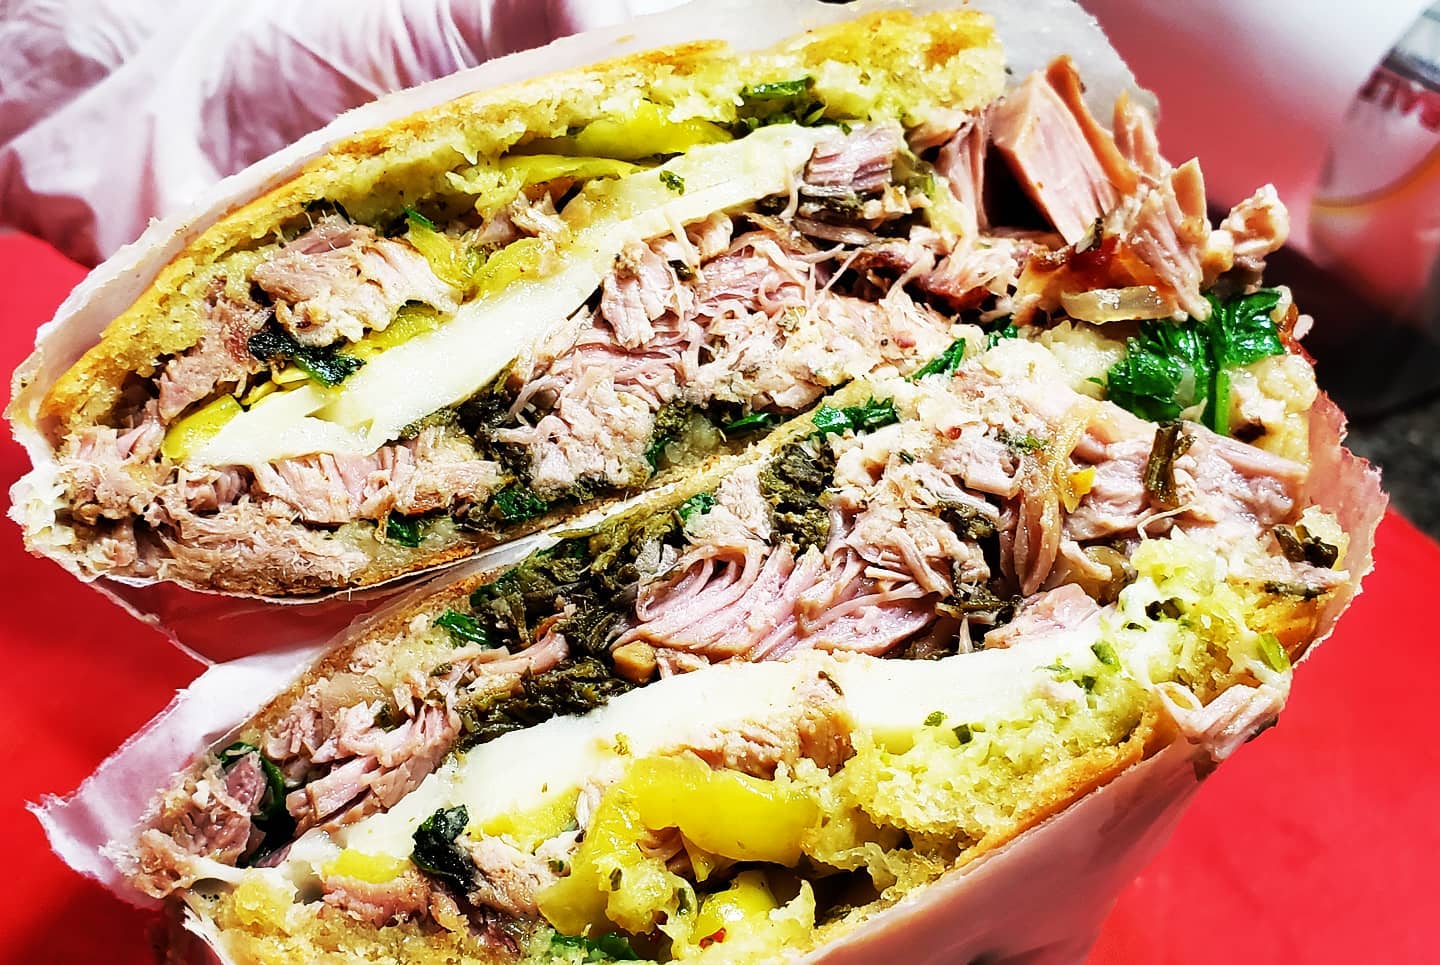  view of two halves of Baldarottaâ€™s Porketta sandwich shows layers of shredded pork, chunky salsa verde, and sliced banana peppers with a thick layer of provolone cheese running through the center of the other ingredients. Photo by Jordan Baldarotta.